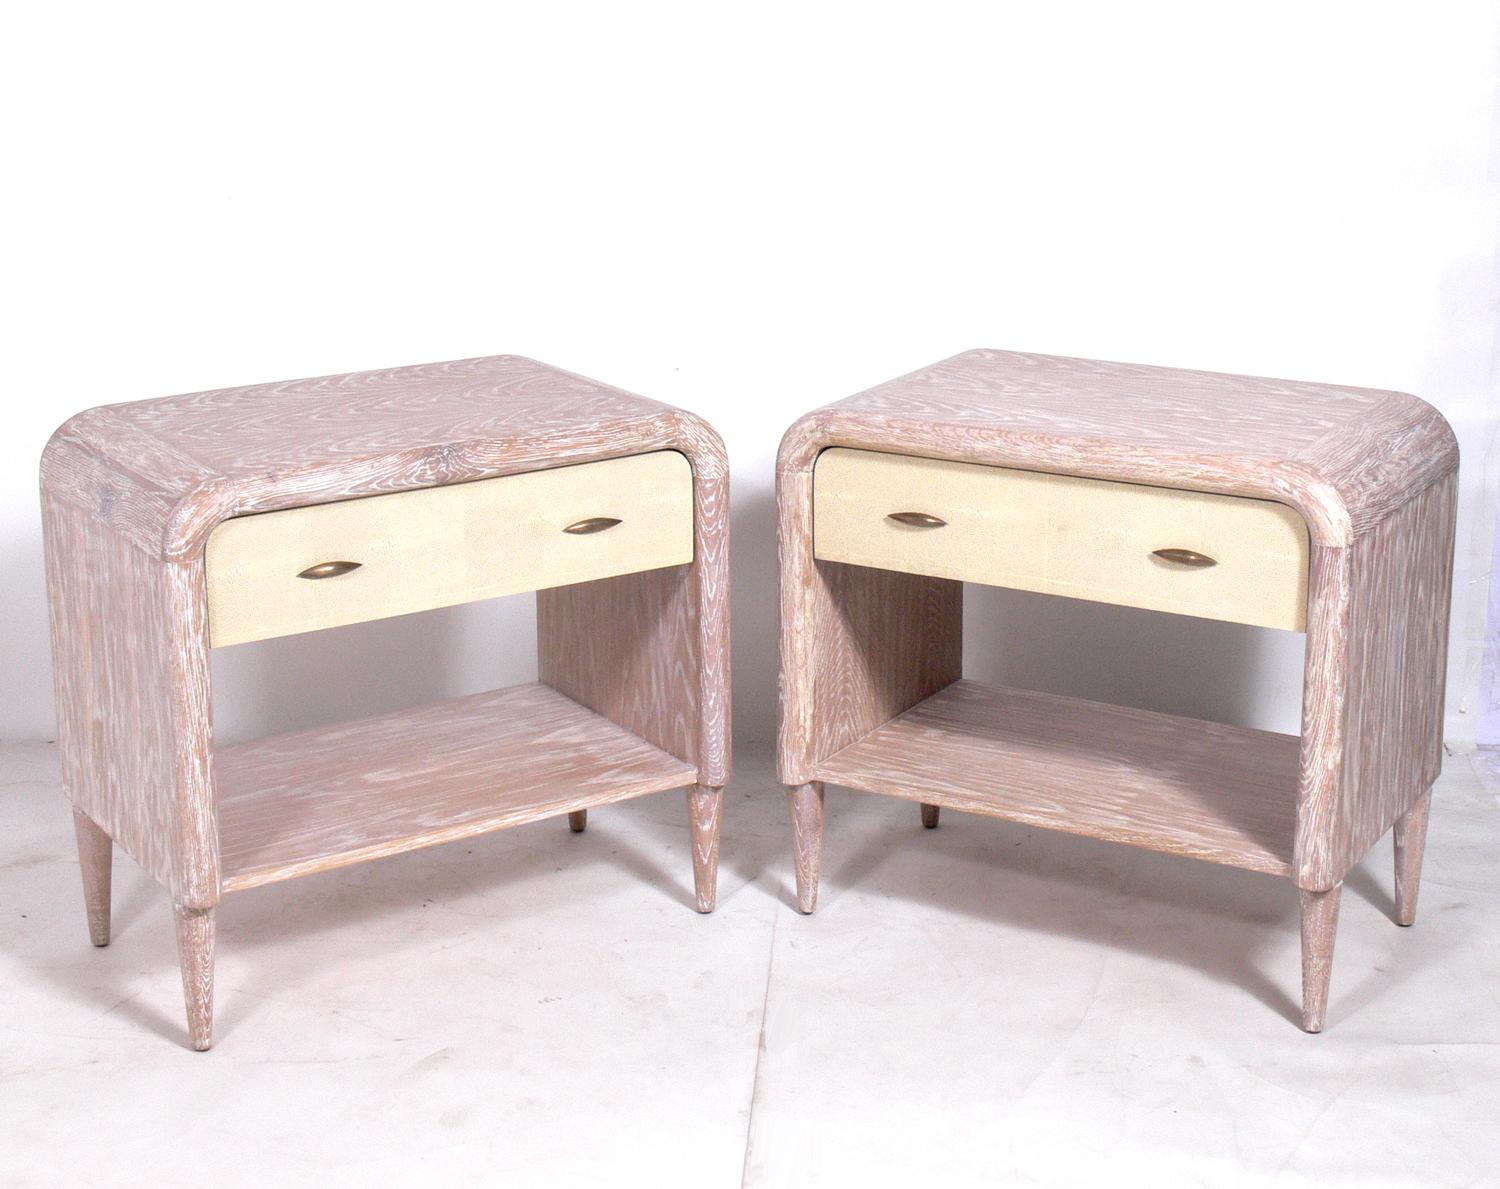 Pair of limed wood and faux Shagreen nightstands, American, circa 1990s. They are a versatile size and can be used as night stands, or as side or end tables.